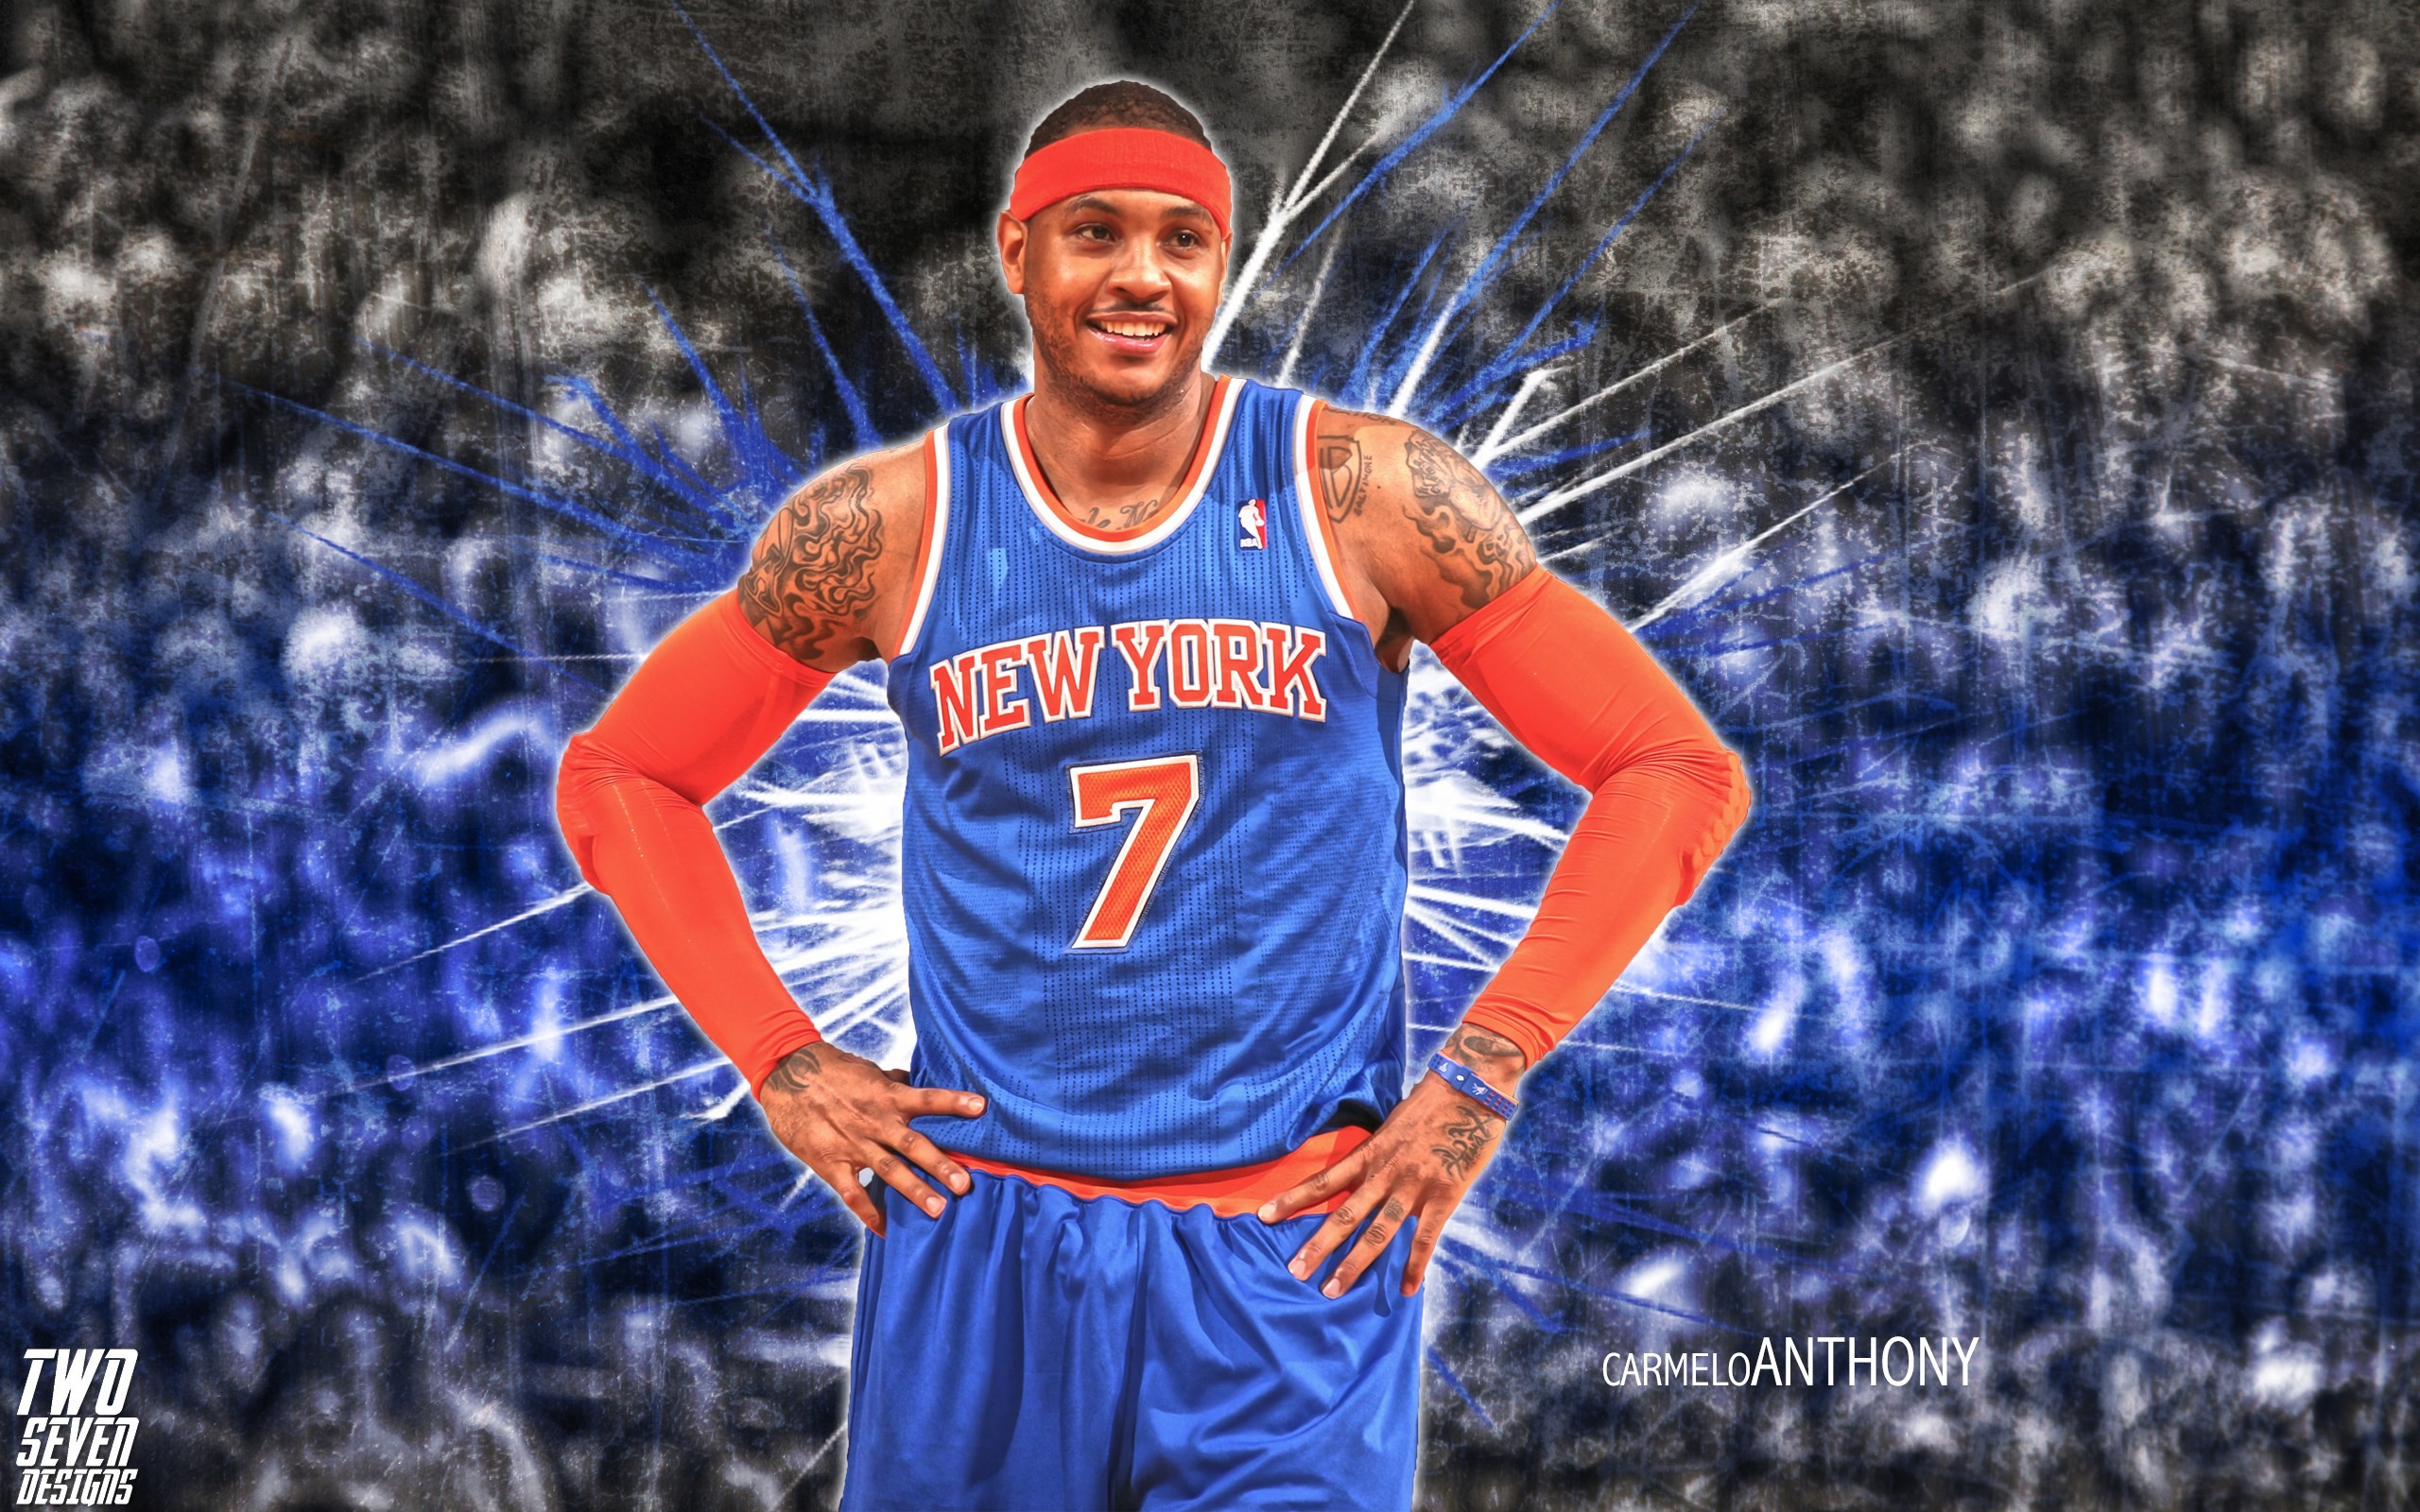 2560x1600 pictures of carmelo anthony, 3318 kB - Hartley Sheldon